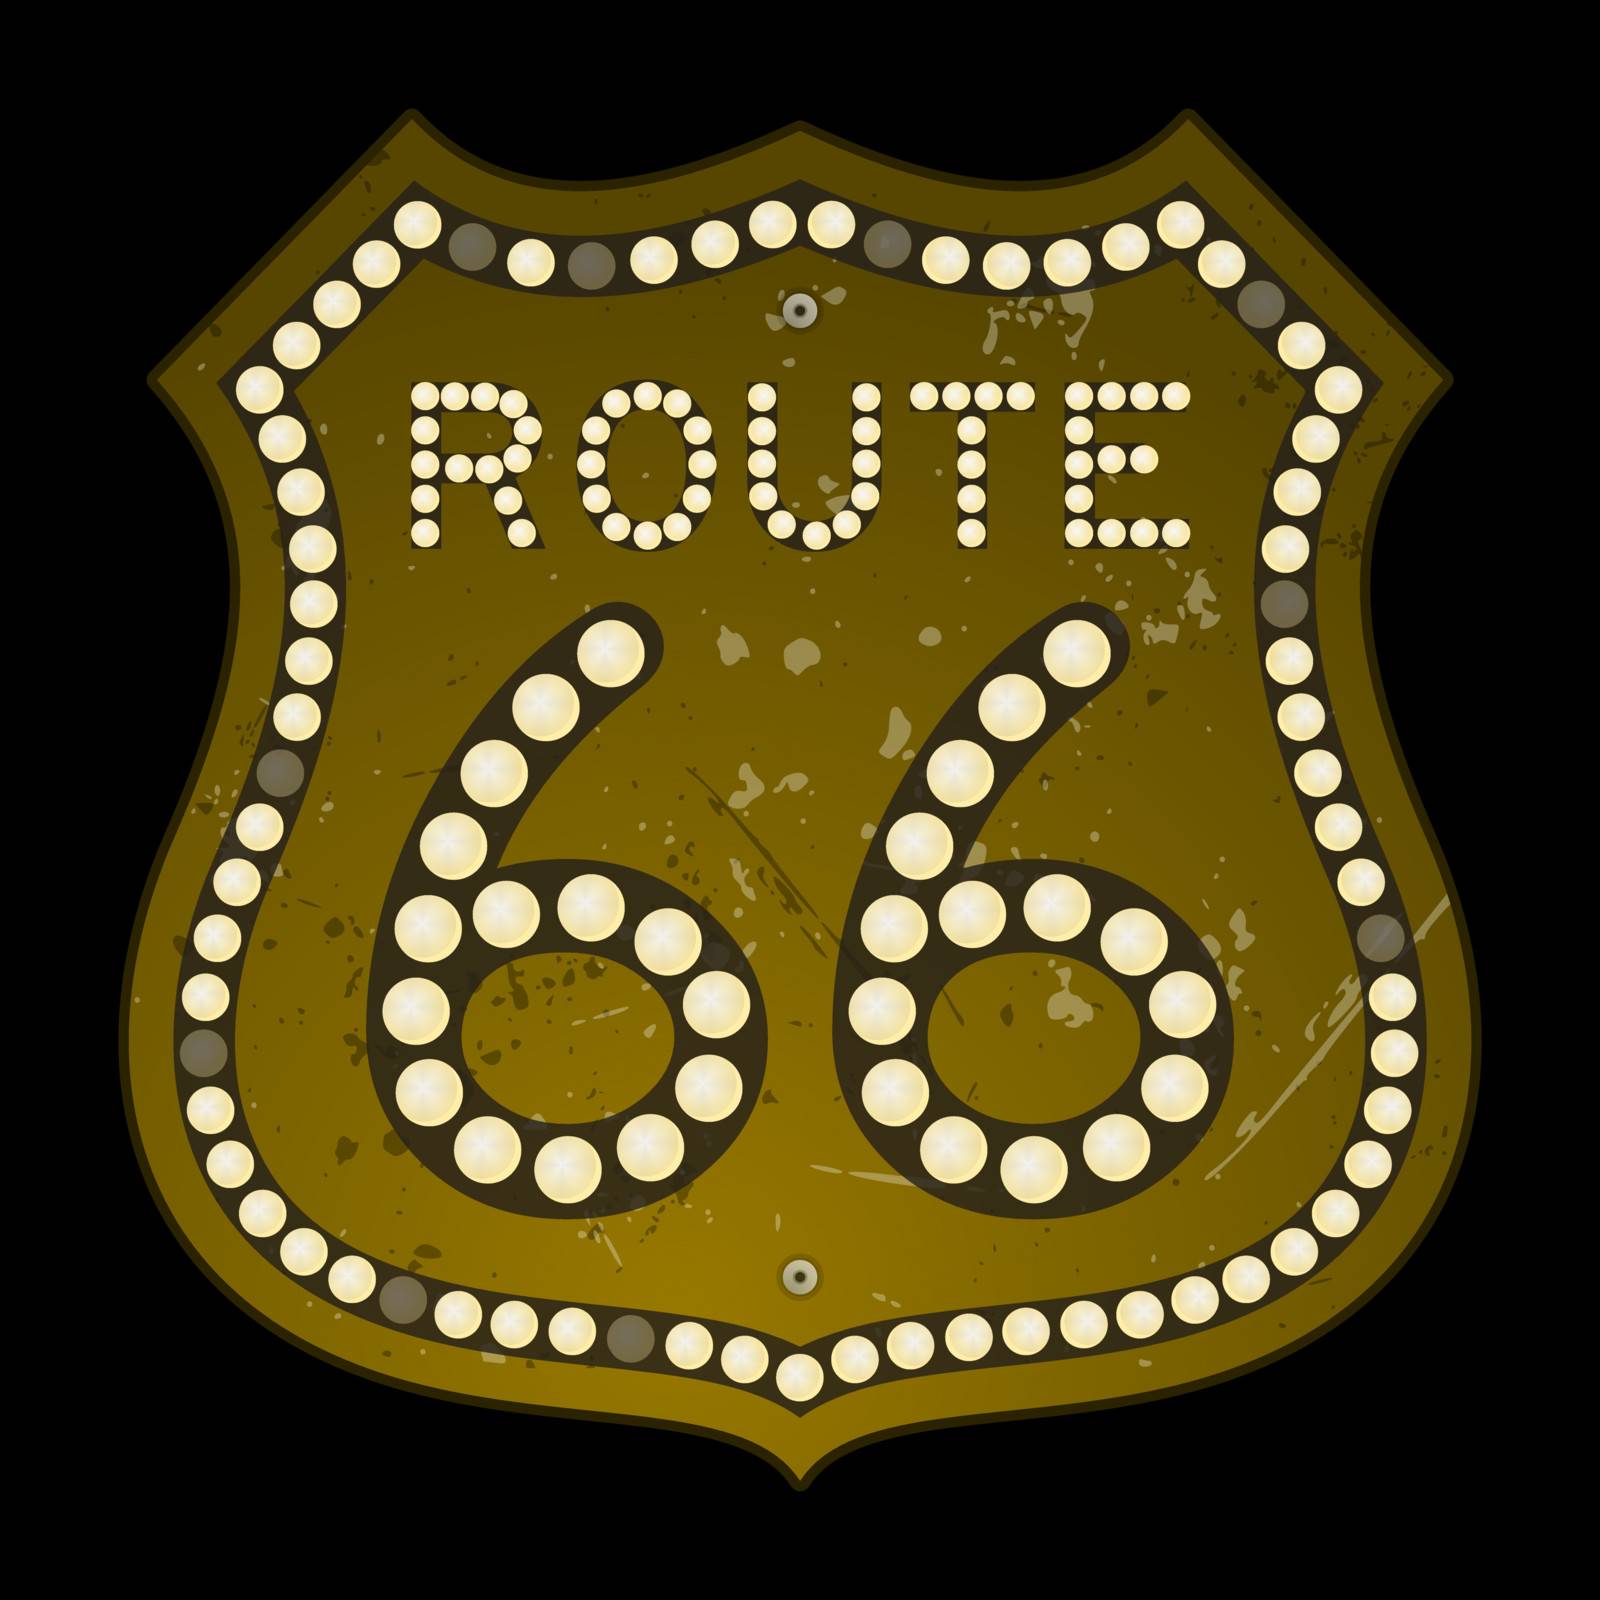 Illuminated Route 66 Sign by zager